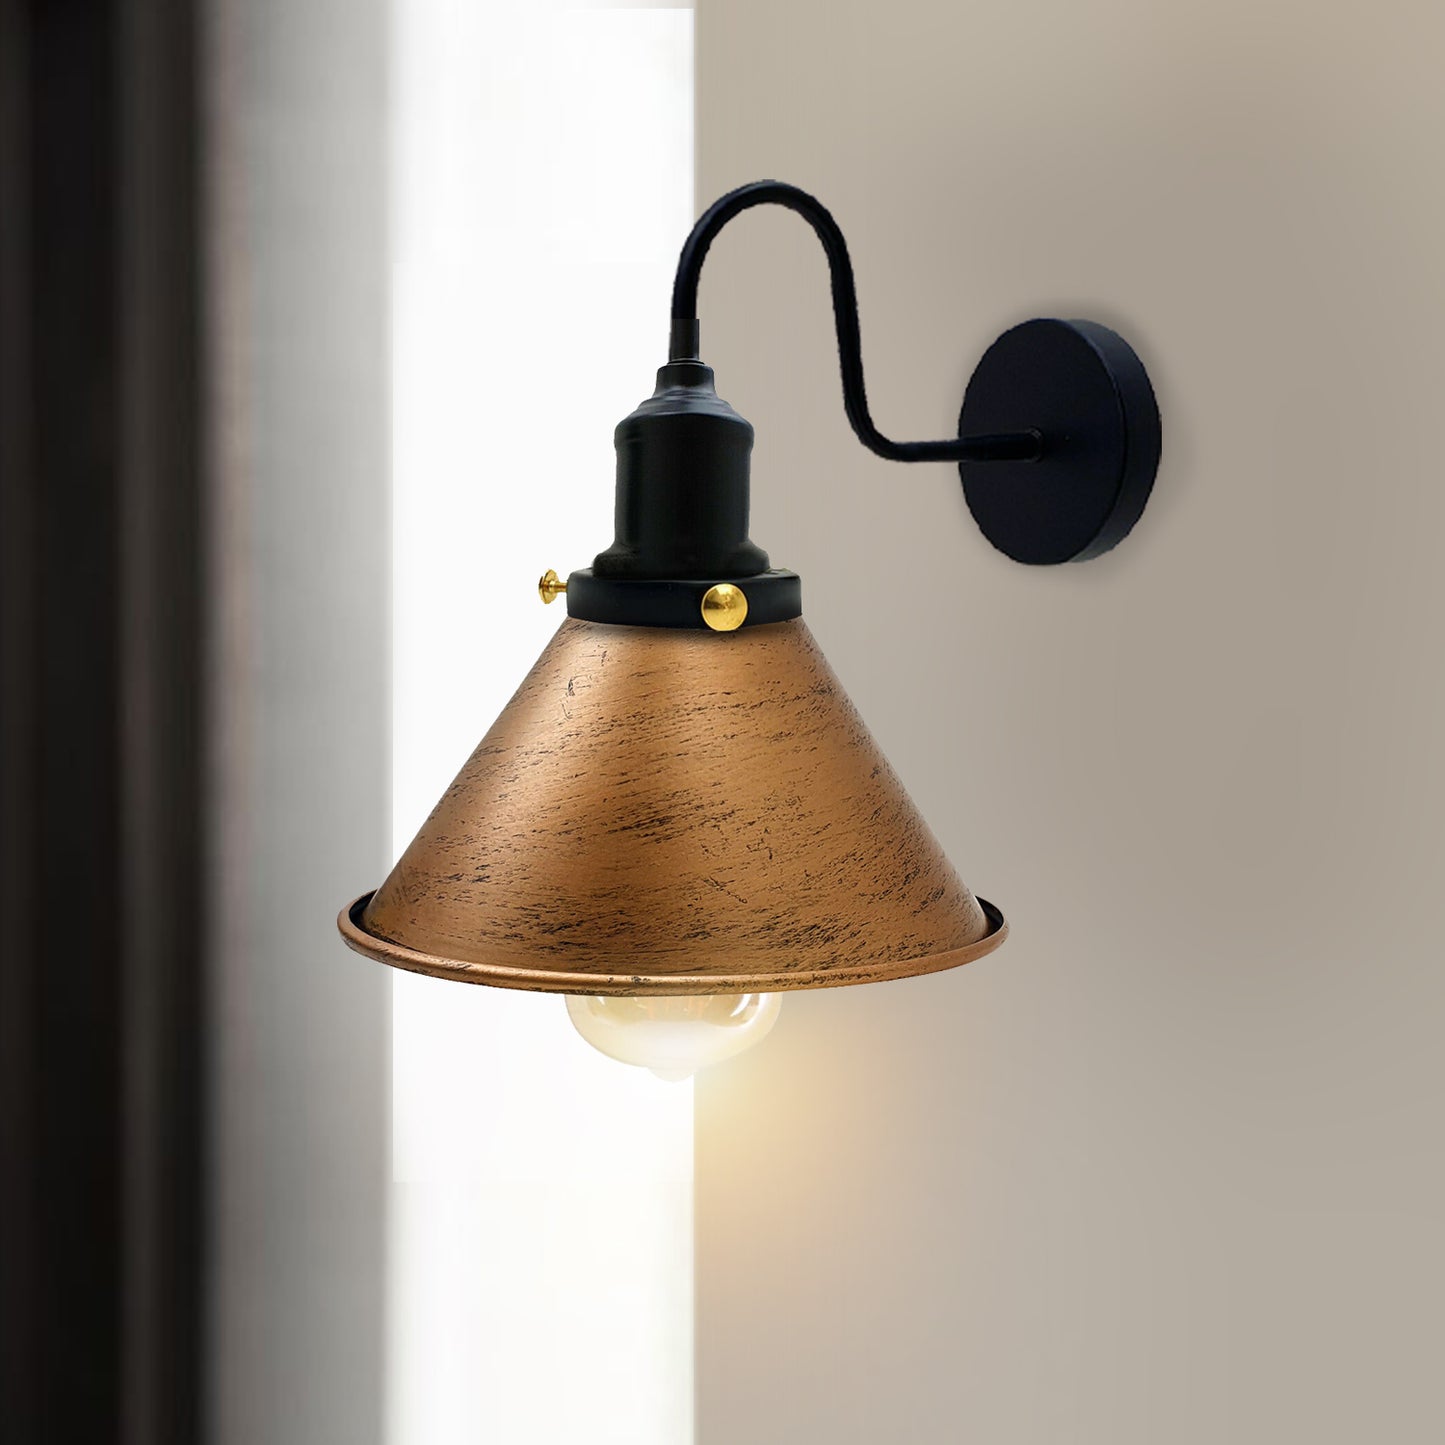 Retro Industrial Swan Neck Cone Shape Wall Sconce Light~2162